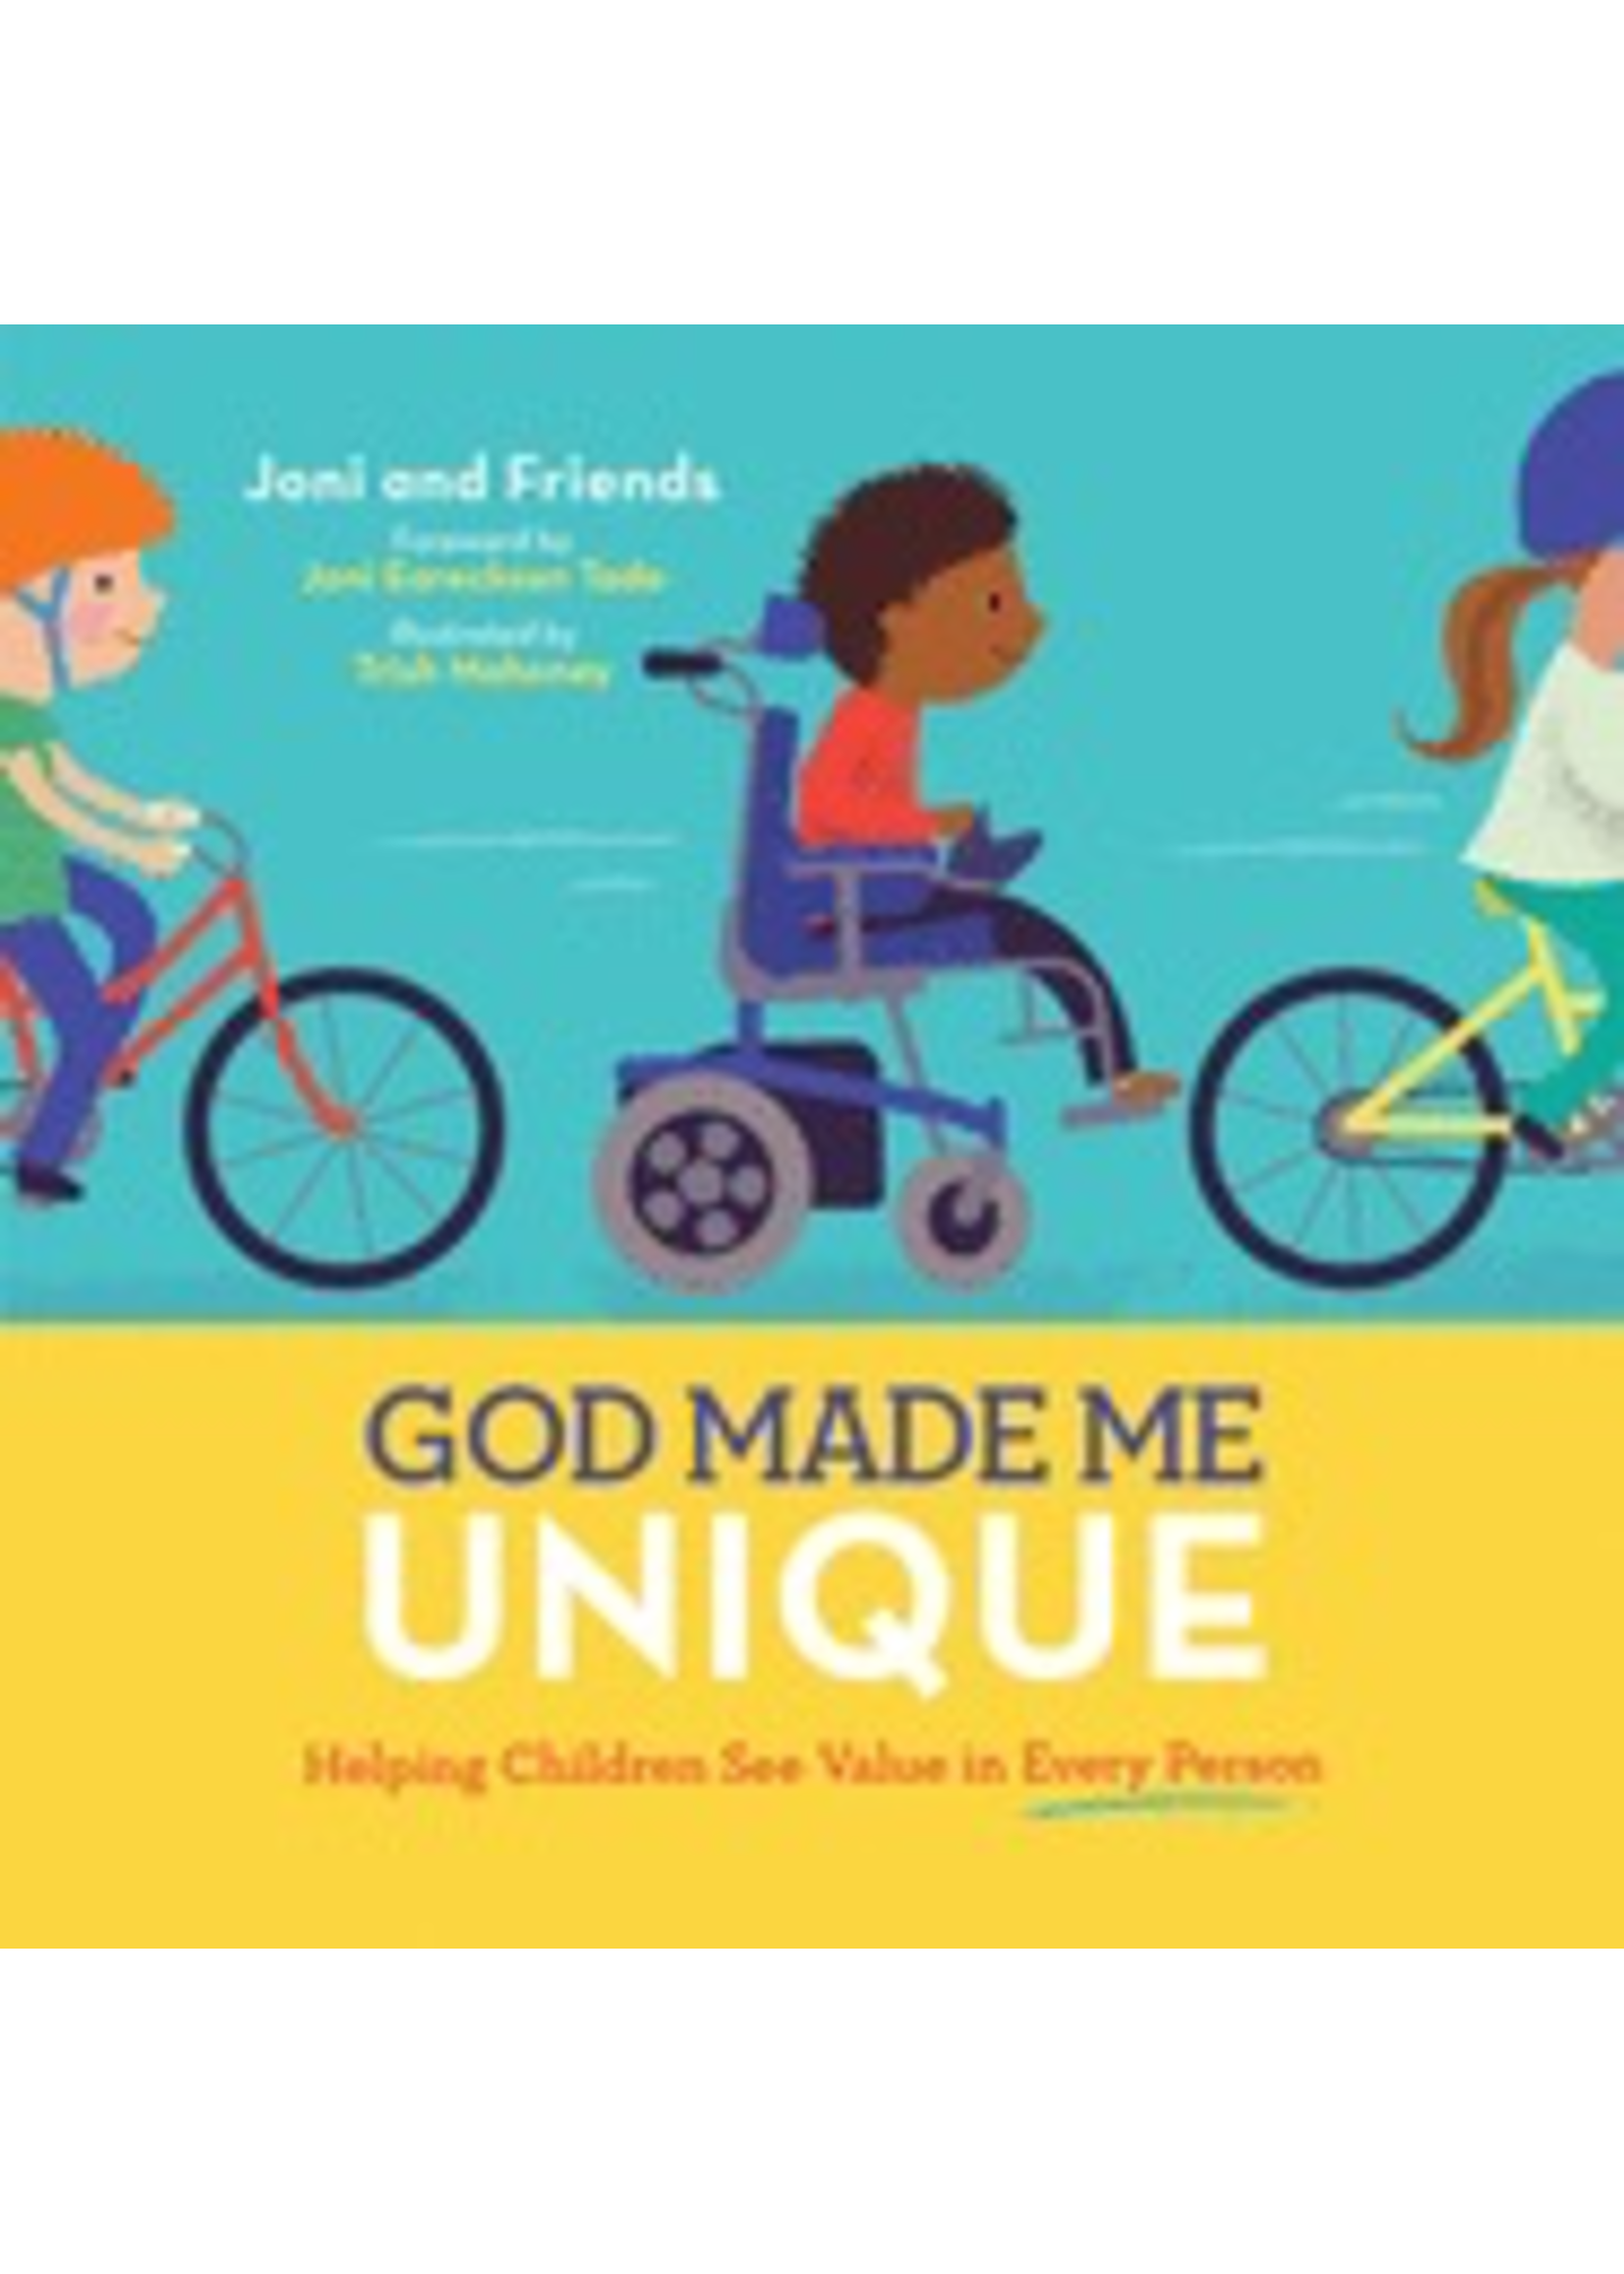 Gift vendor God Made Me Unique: Helping Children See Value in Every Person